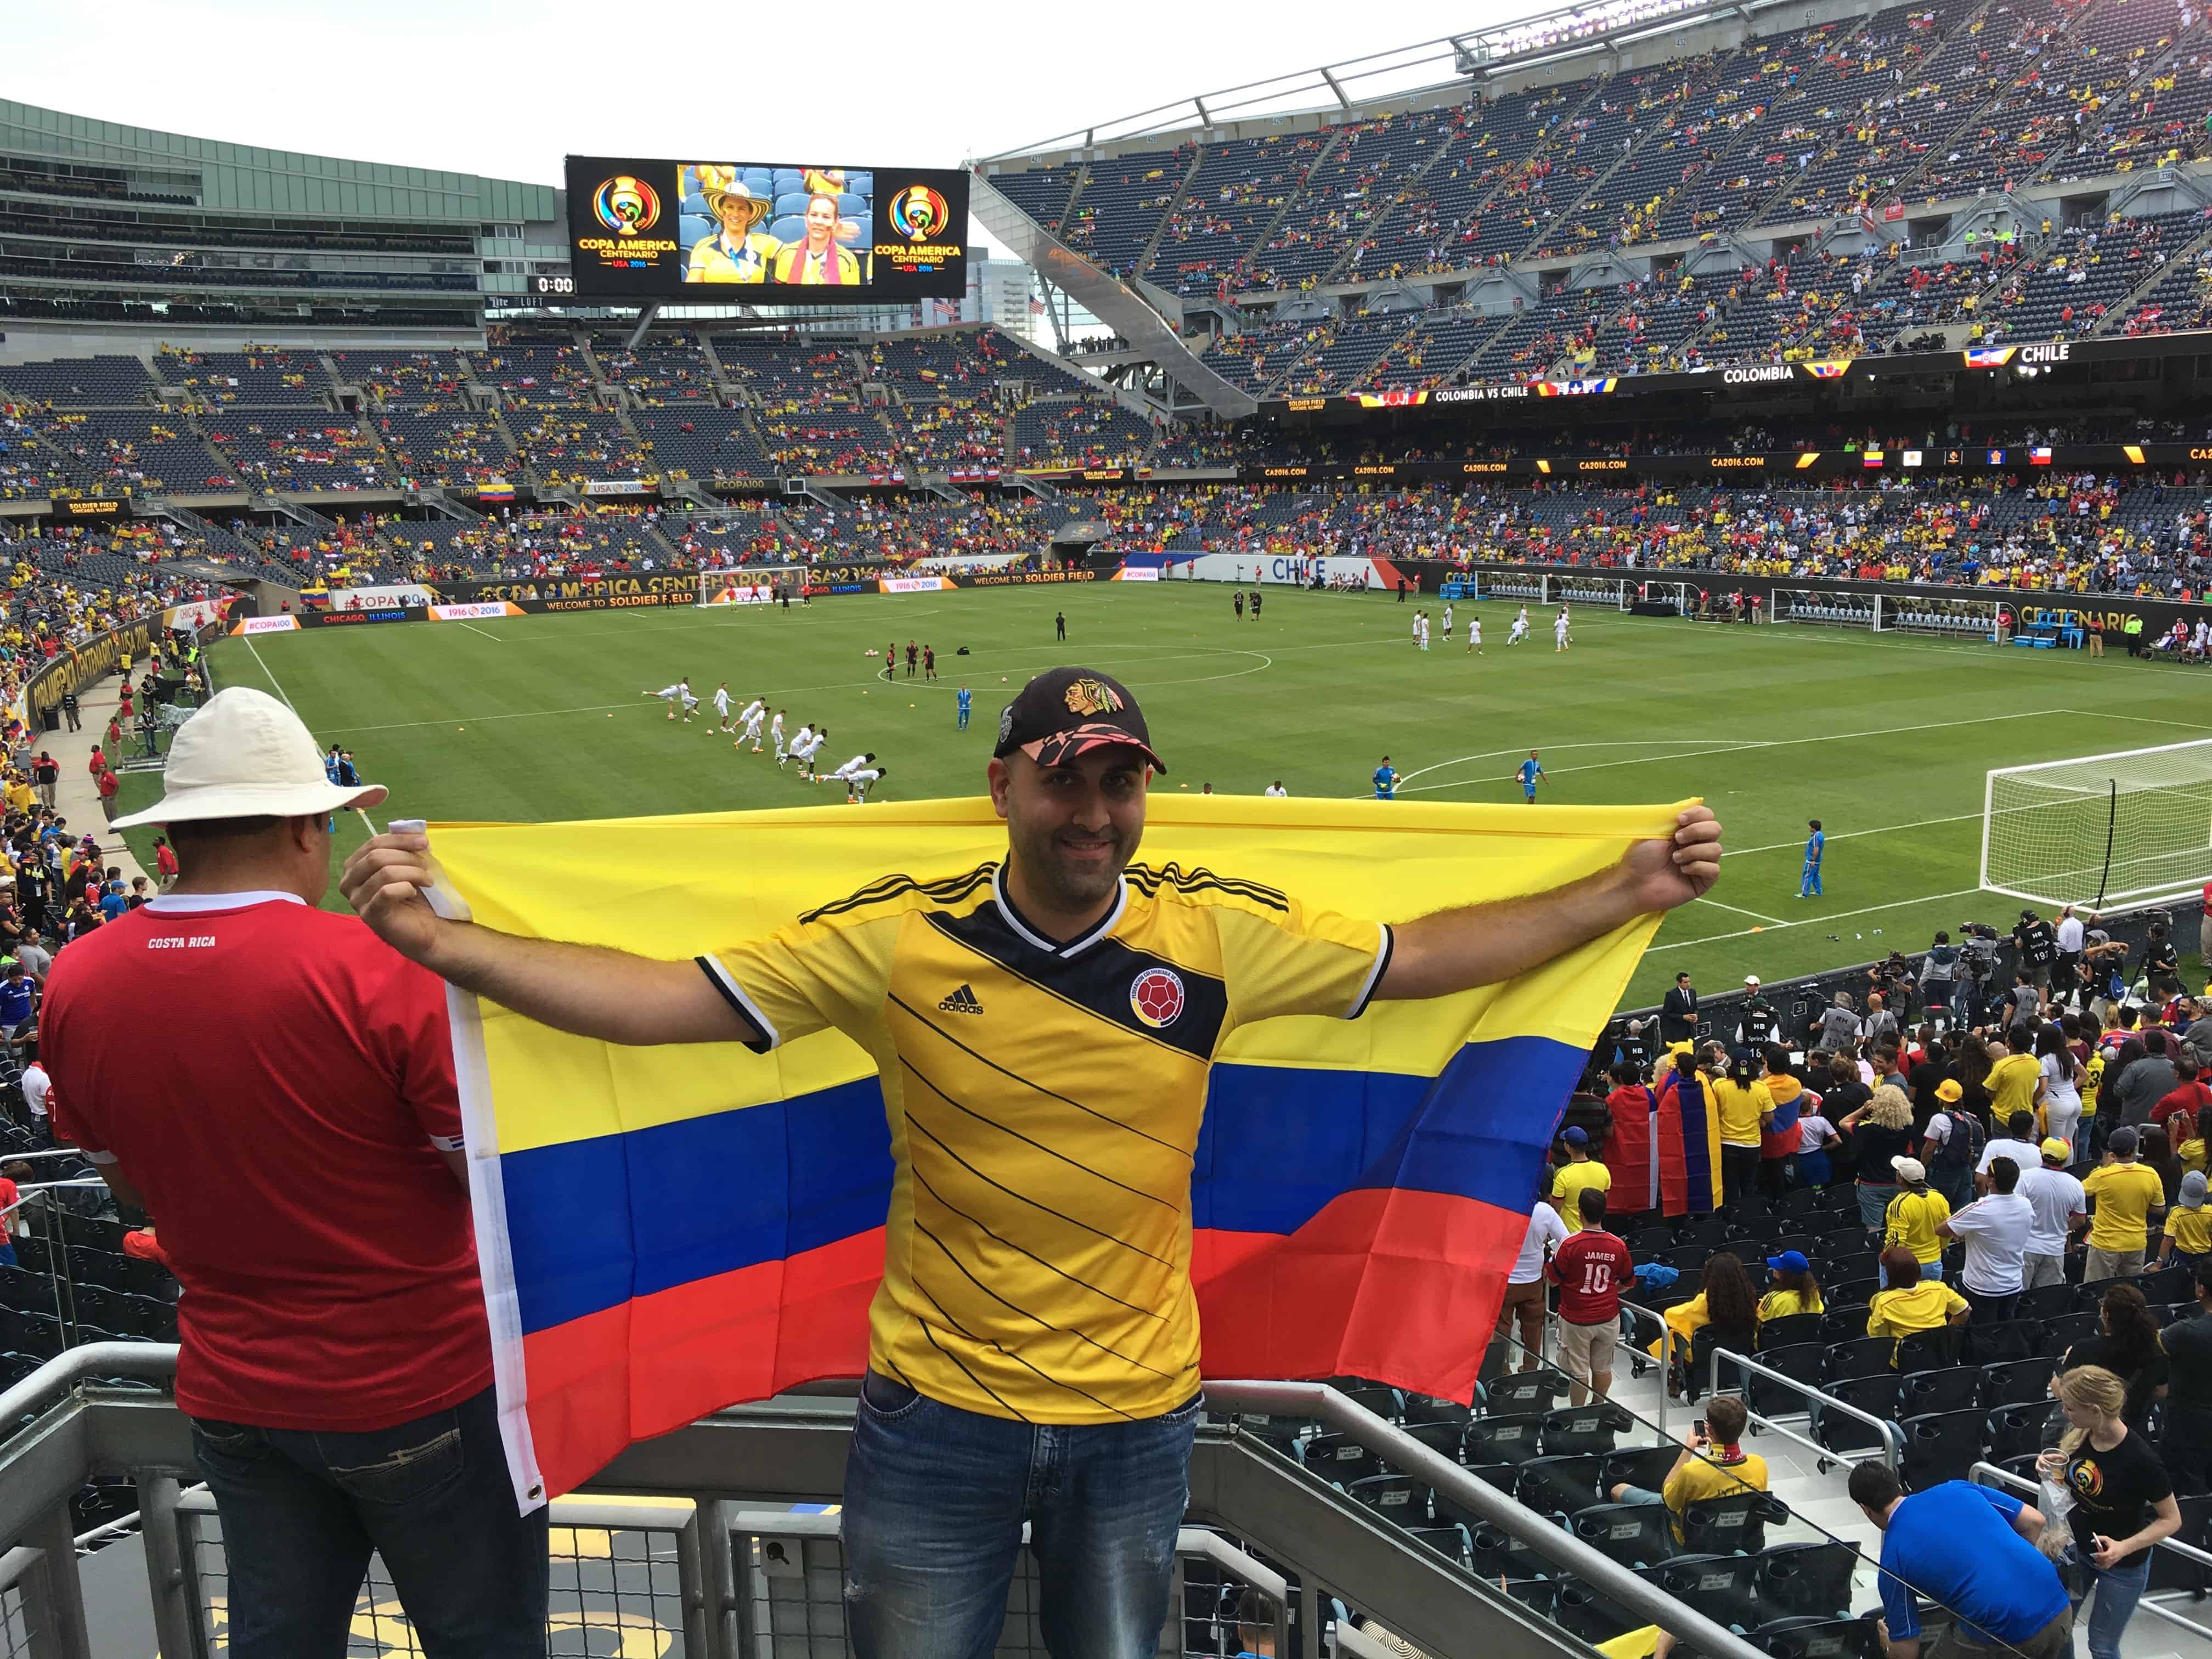 Me at Colombia vs Chile